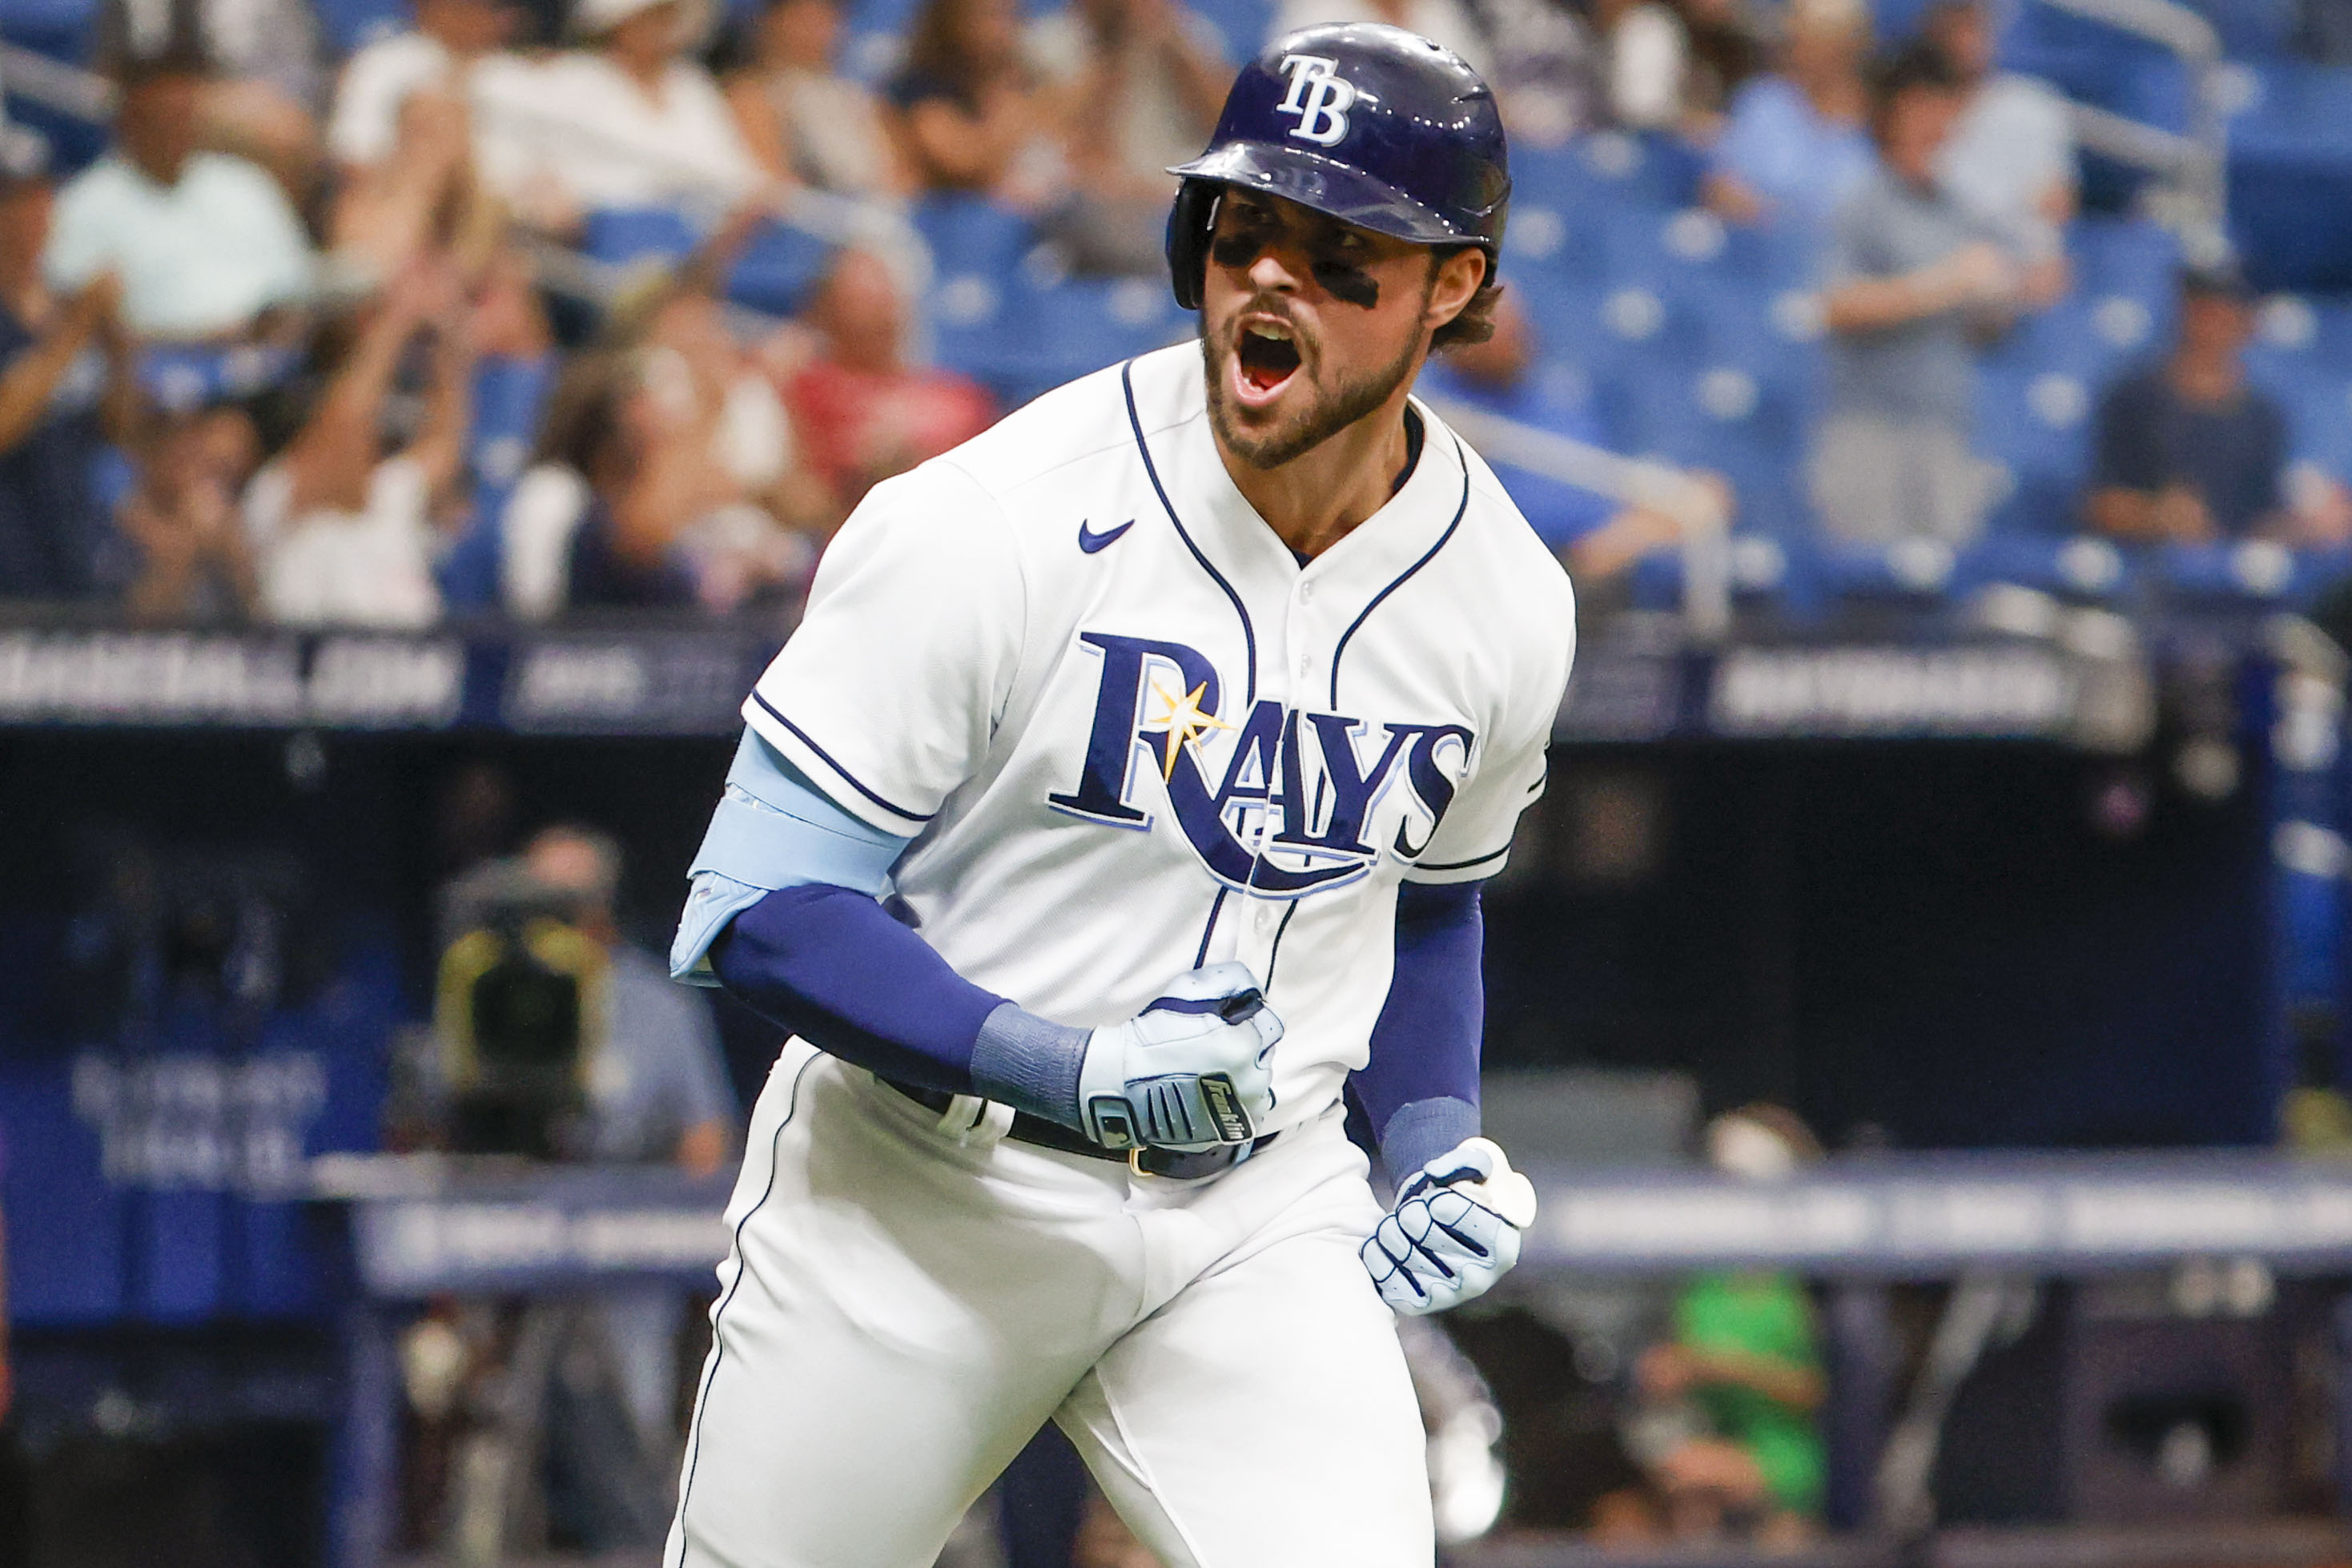 Rays' Ramirez delivers winning hit in 10th to beat Bucs 4-3